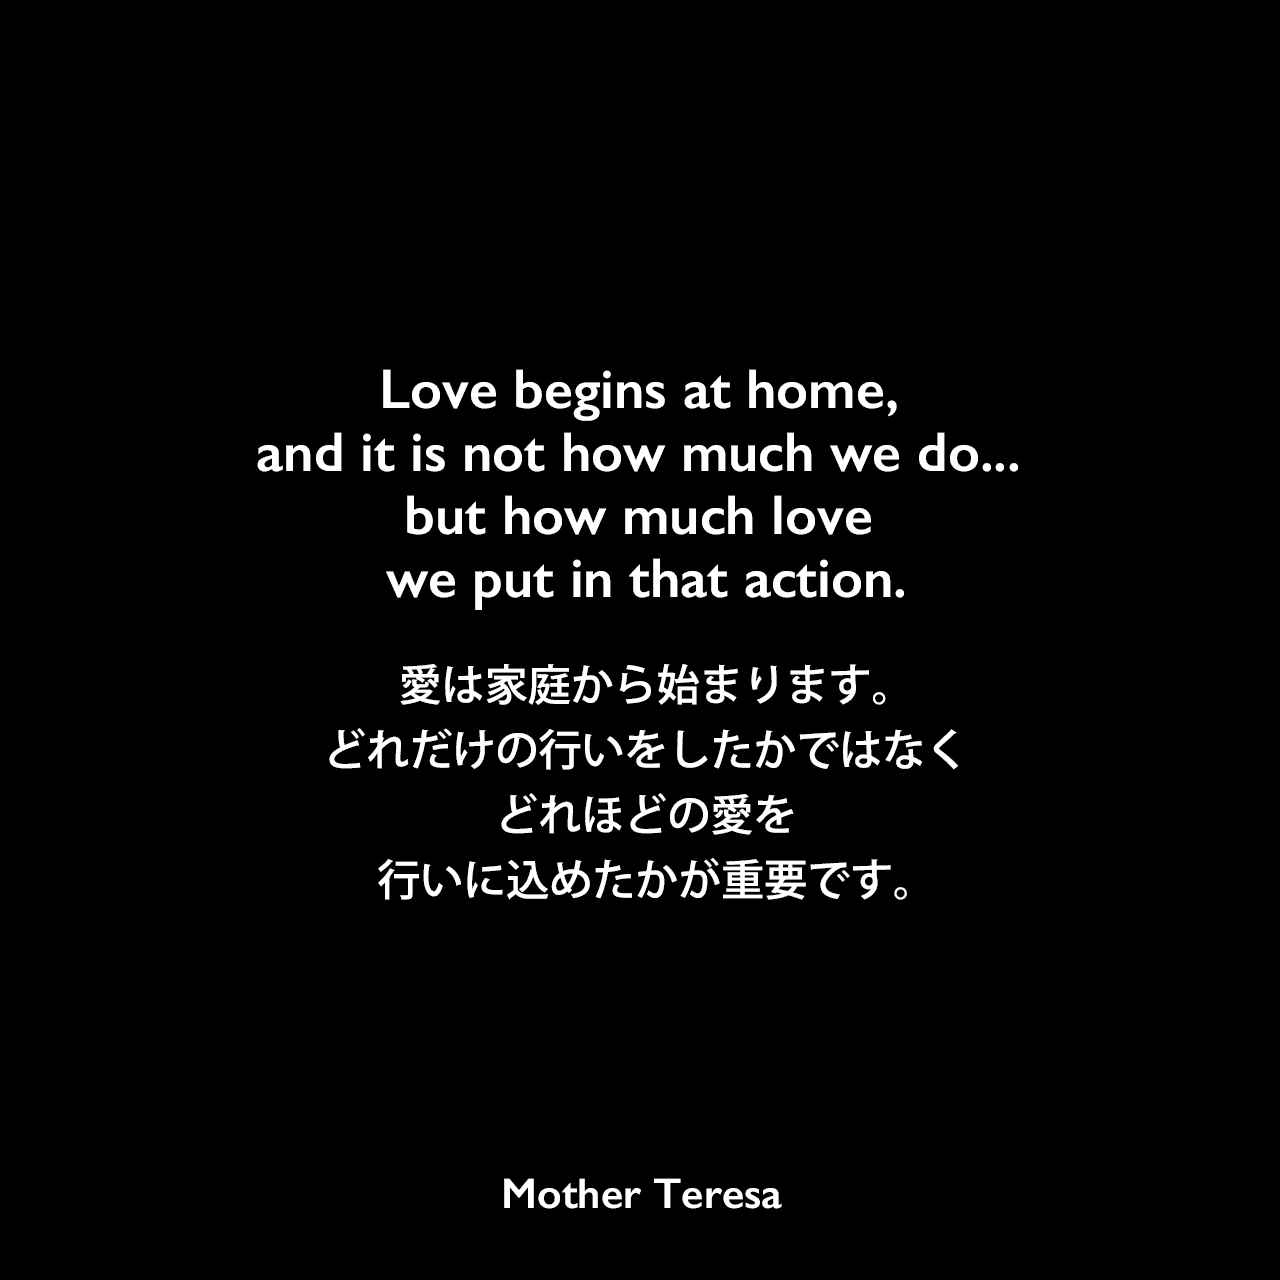 Love begins at home, and it is not how much we do... but how much love we put in that action.愛は家庭から始まります。どれだけの行いをしたかではなく、どれほどの愛を行いに込めたかが重要です。Mother Teresa